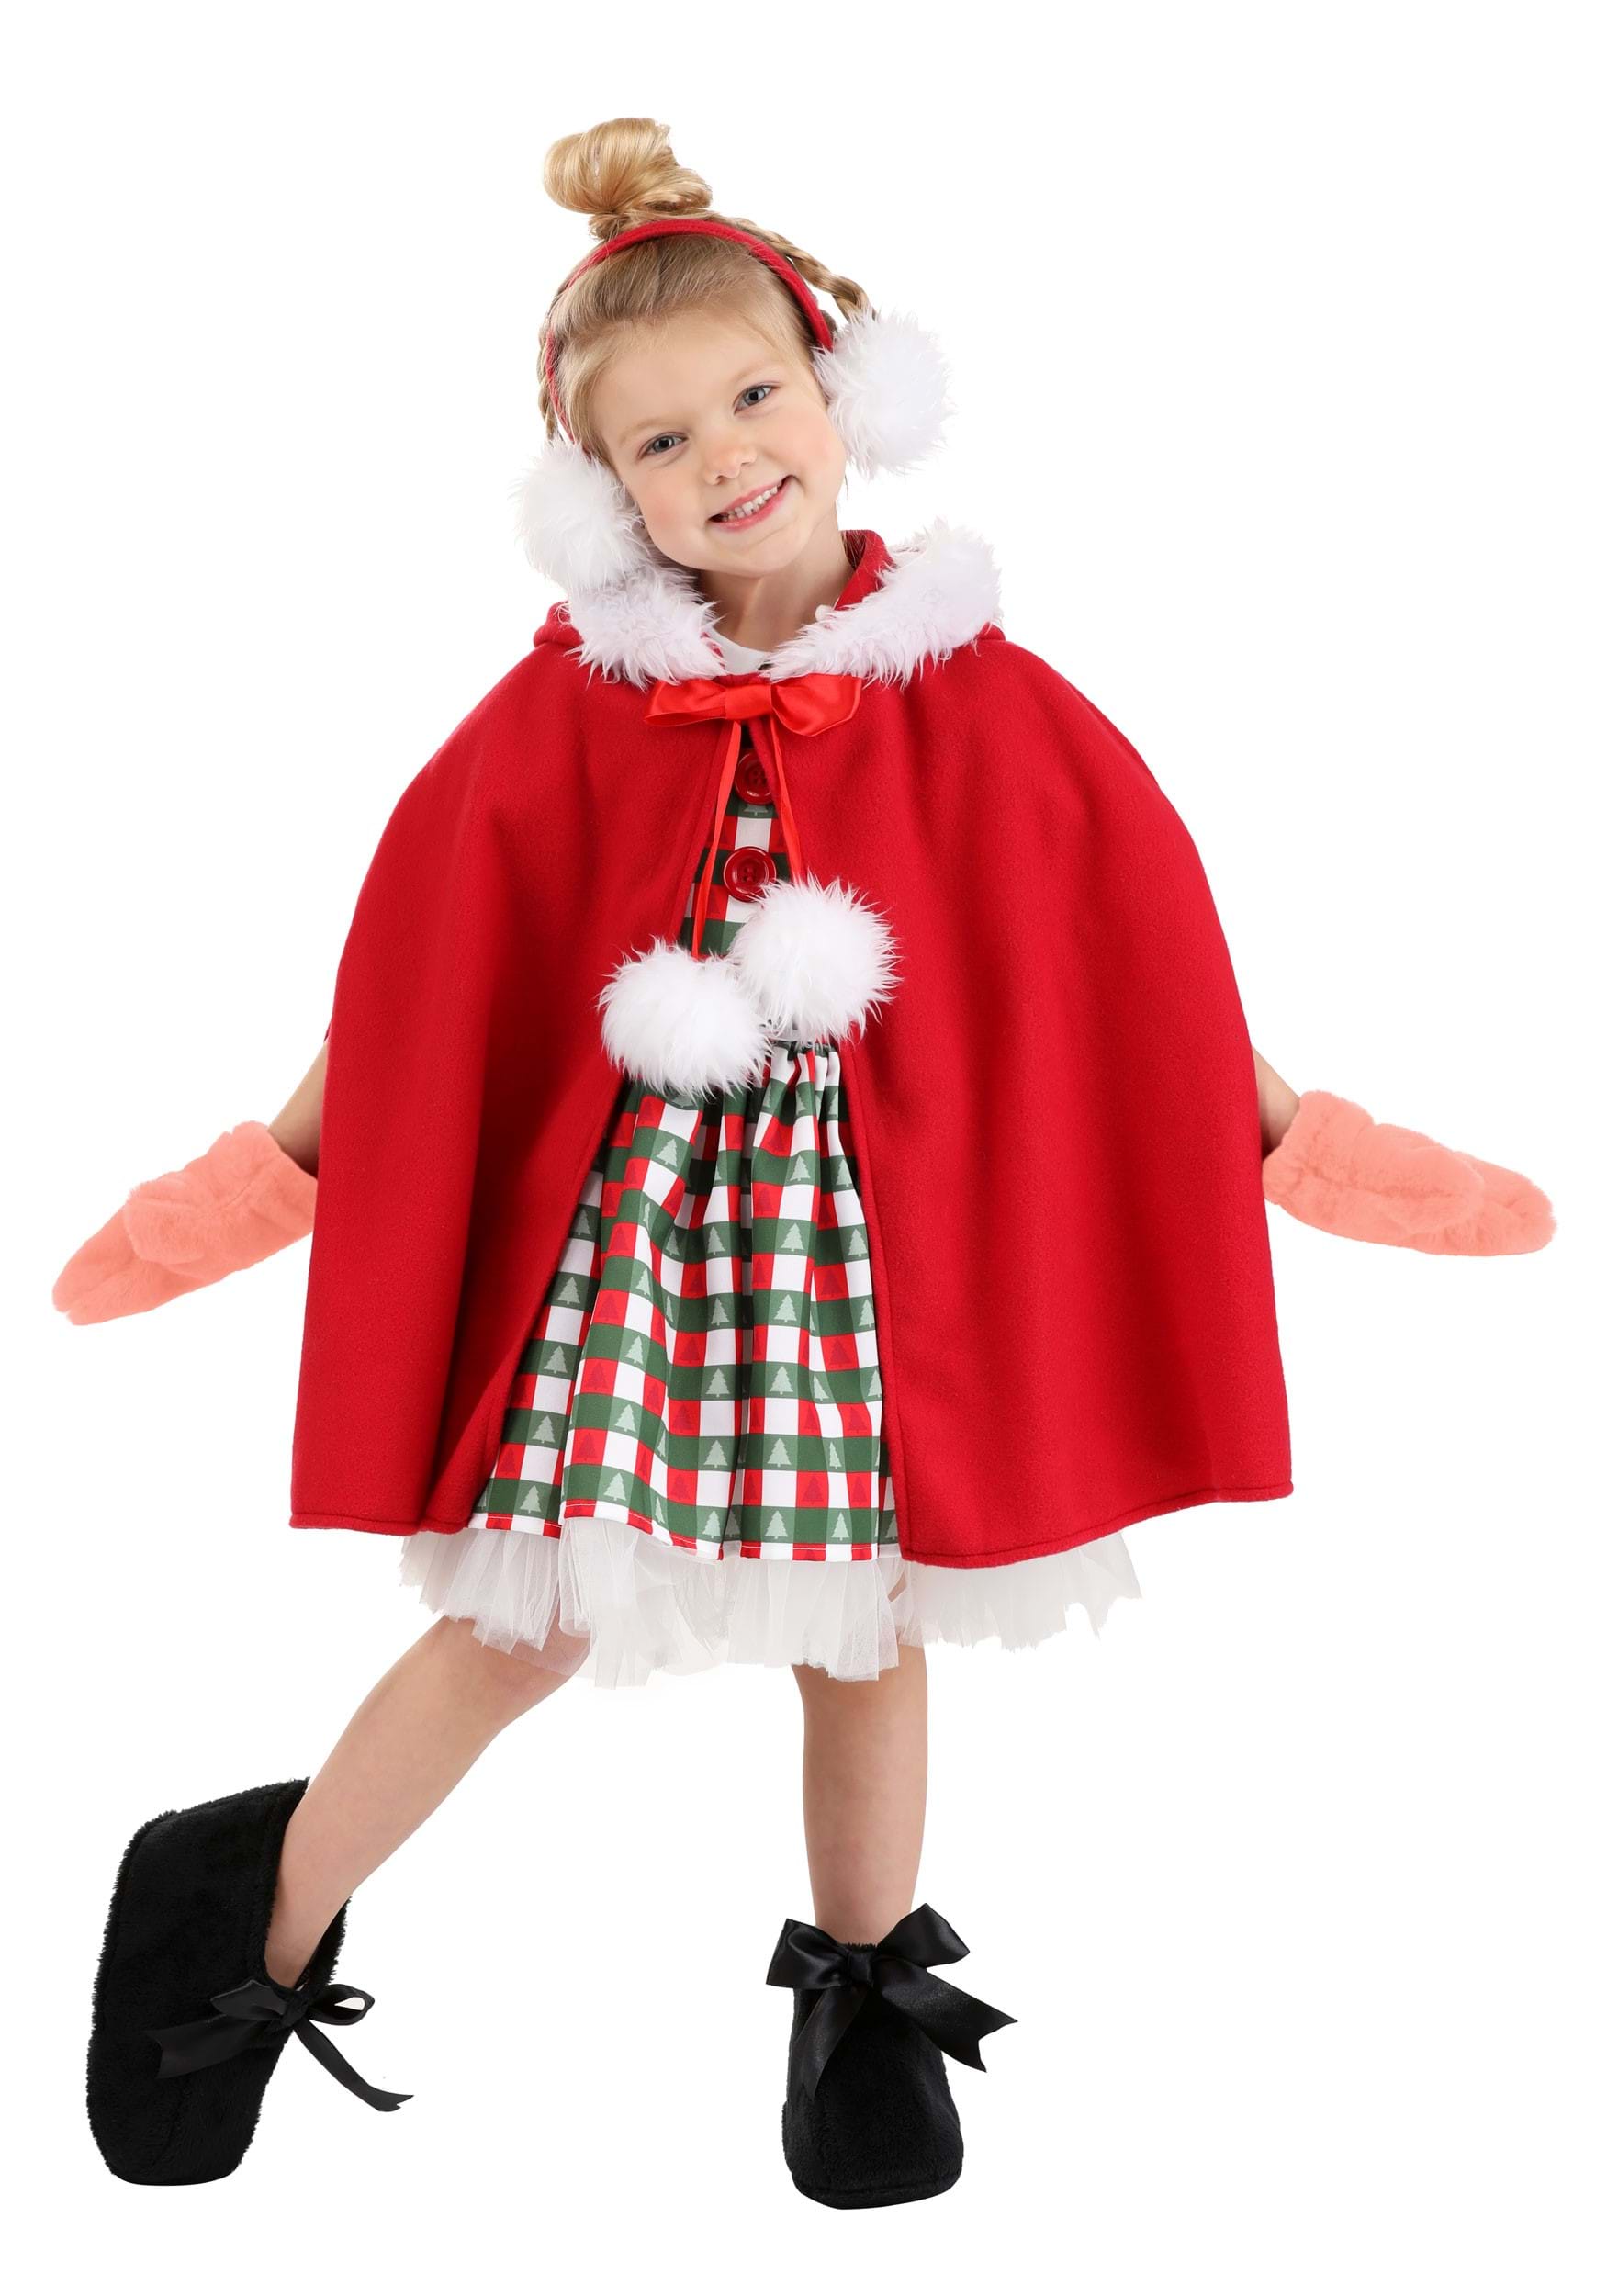 Dr. Seuss Deluxe Storybook Cindy Lou Who Toddler Costume | How the Grinch Stole Christmas Costumes -  FUN Costumes